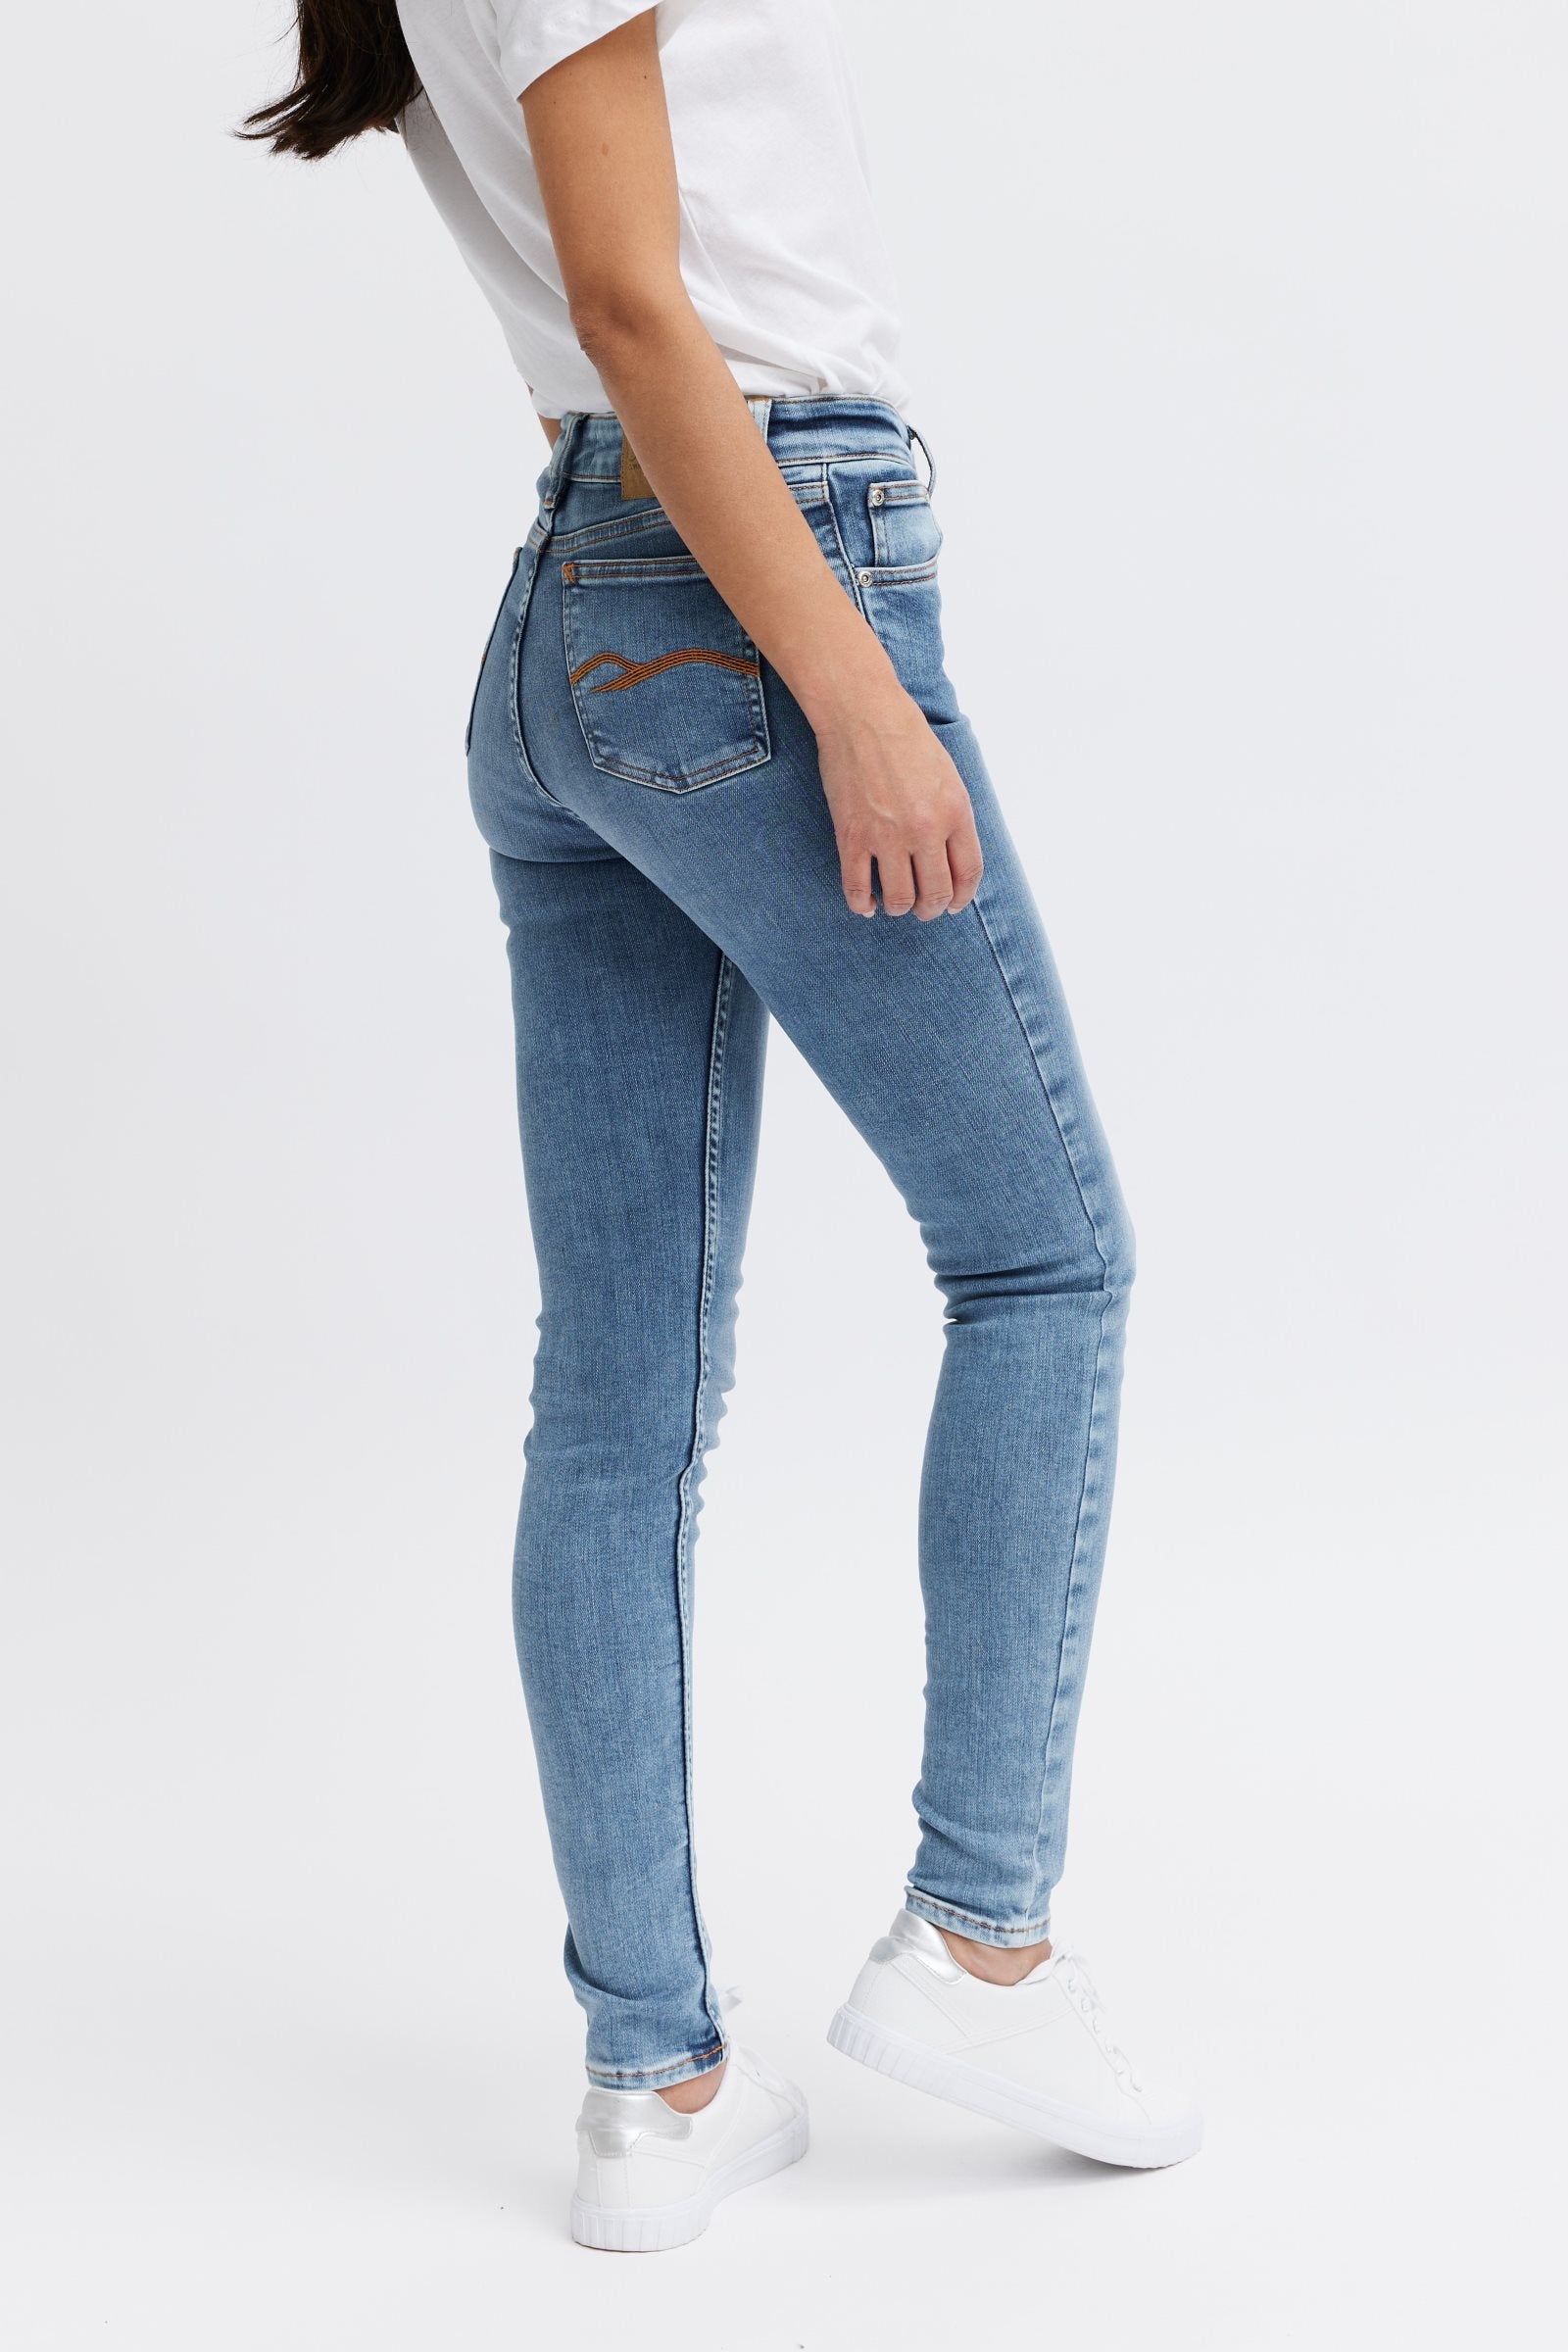 Best organic jeans for women - body shaping fit